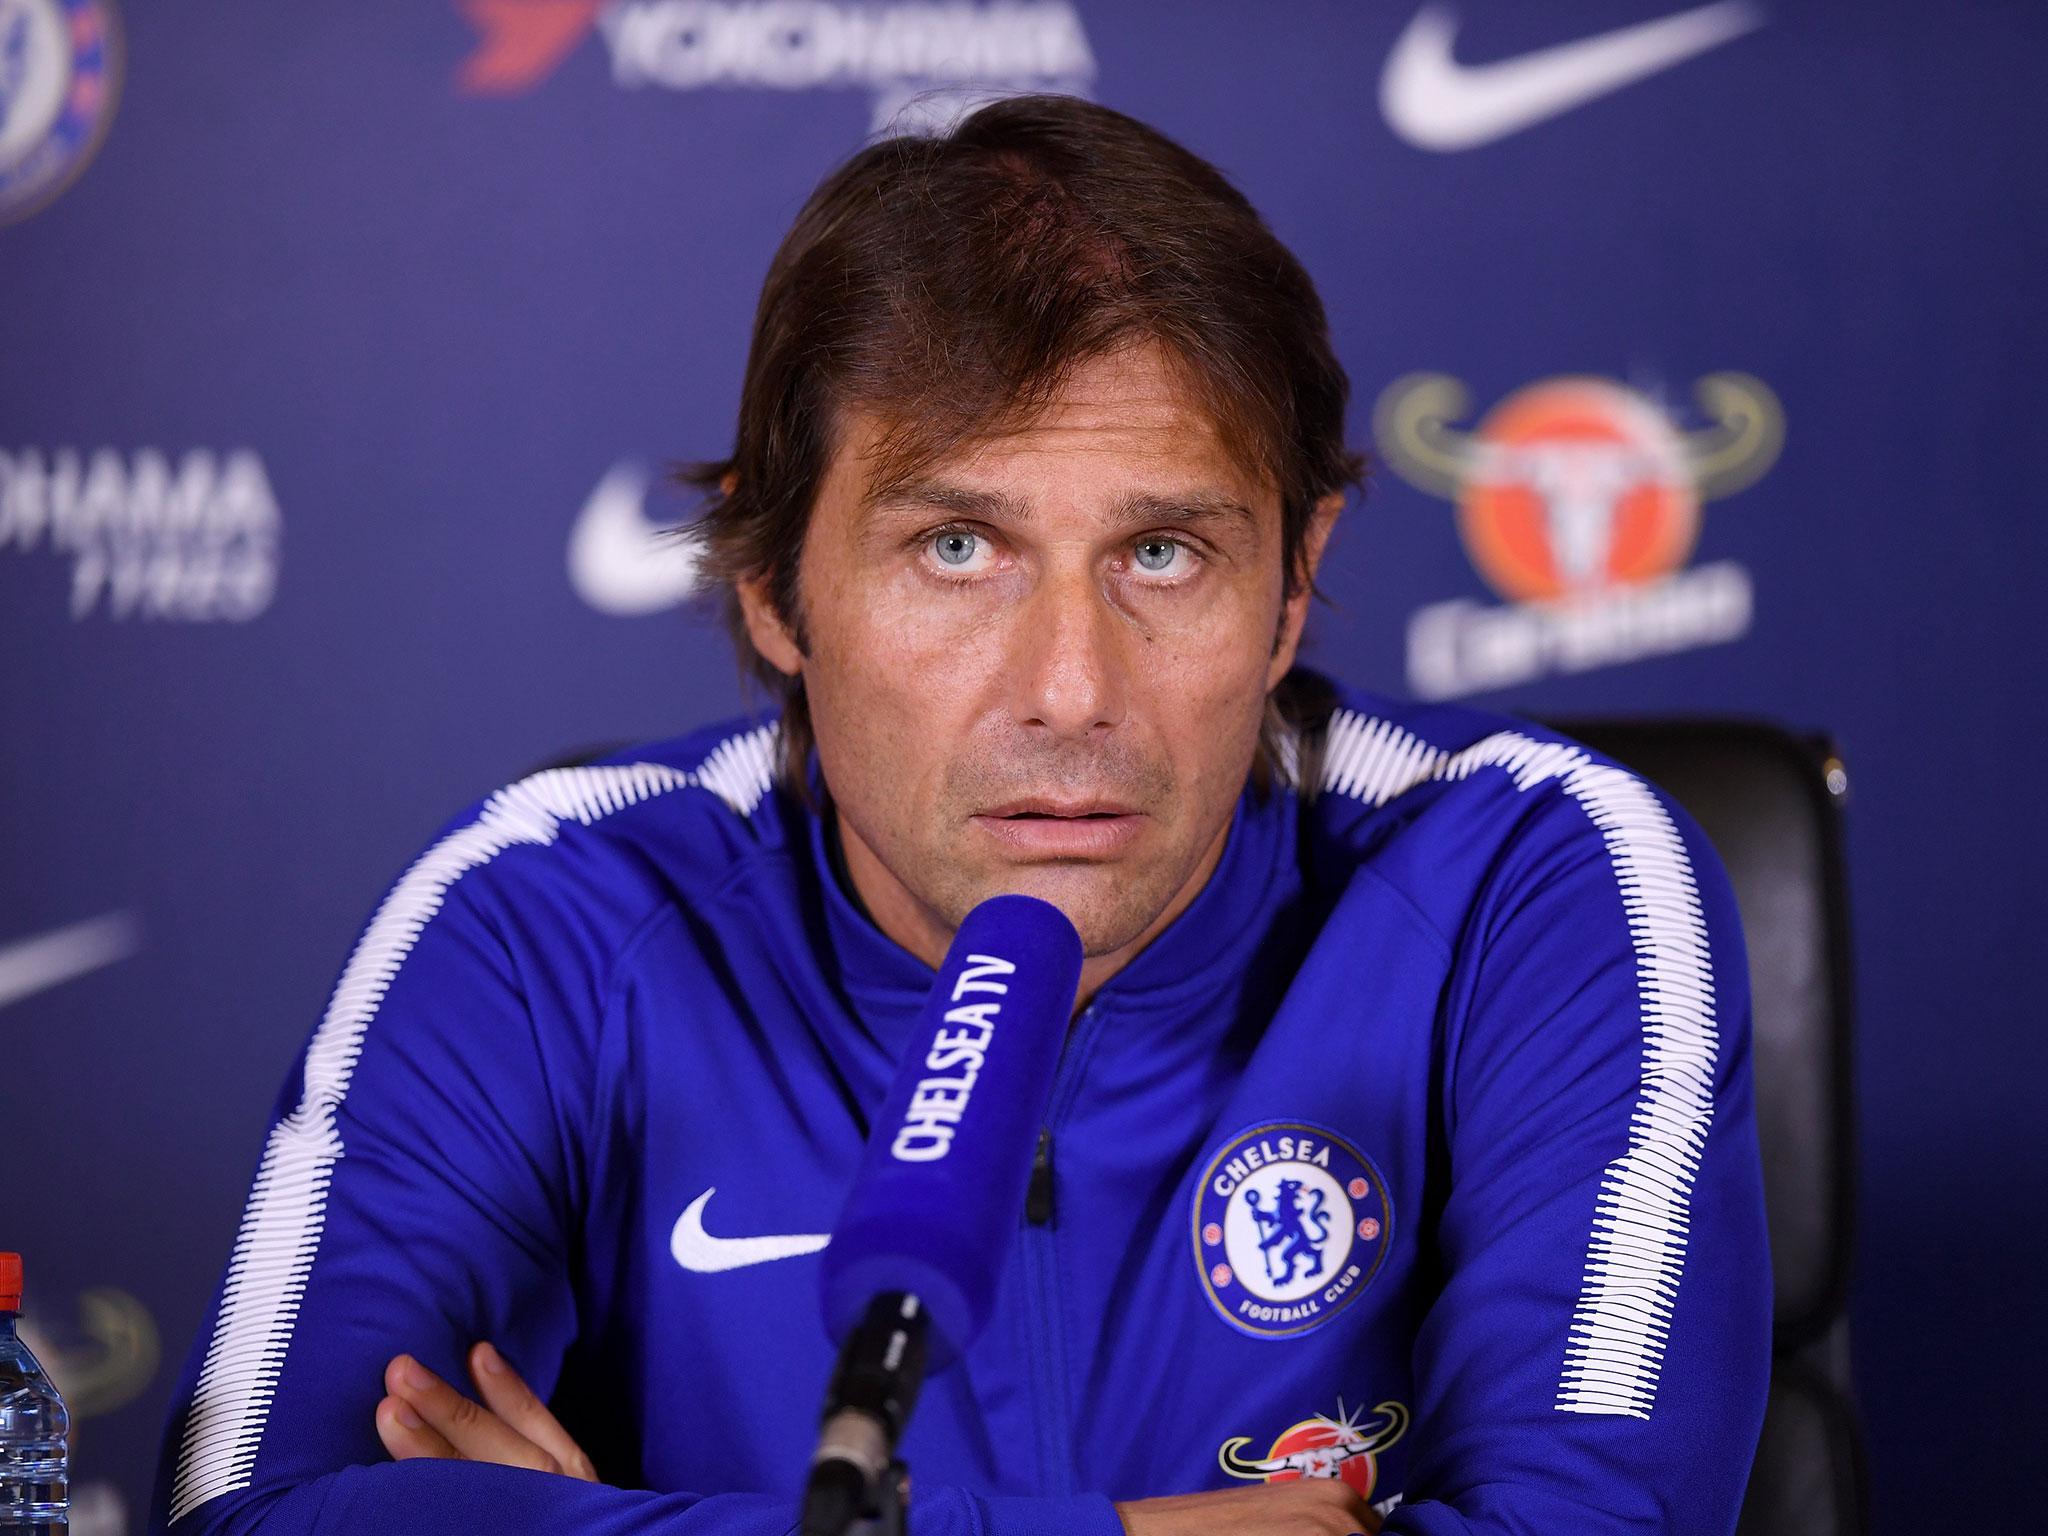 Antonio Conte reveals his first year in England wasn't all good despite success on the pitch